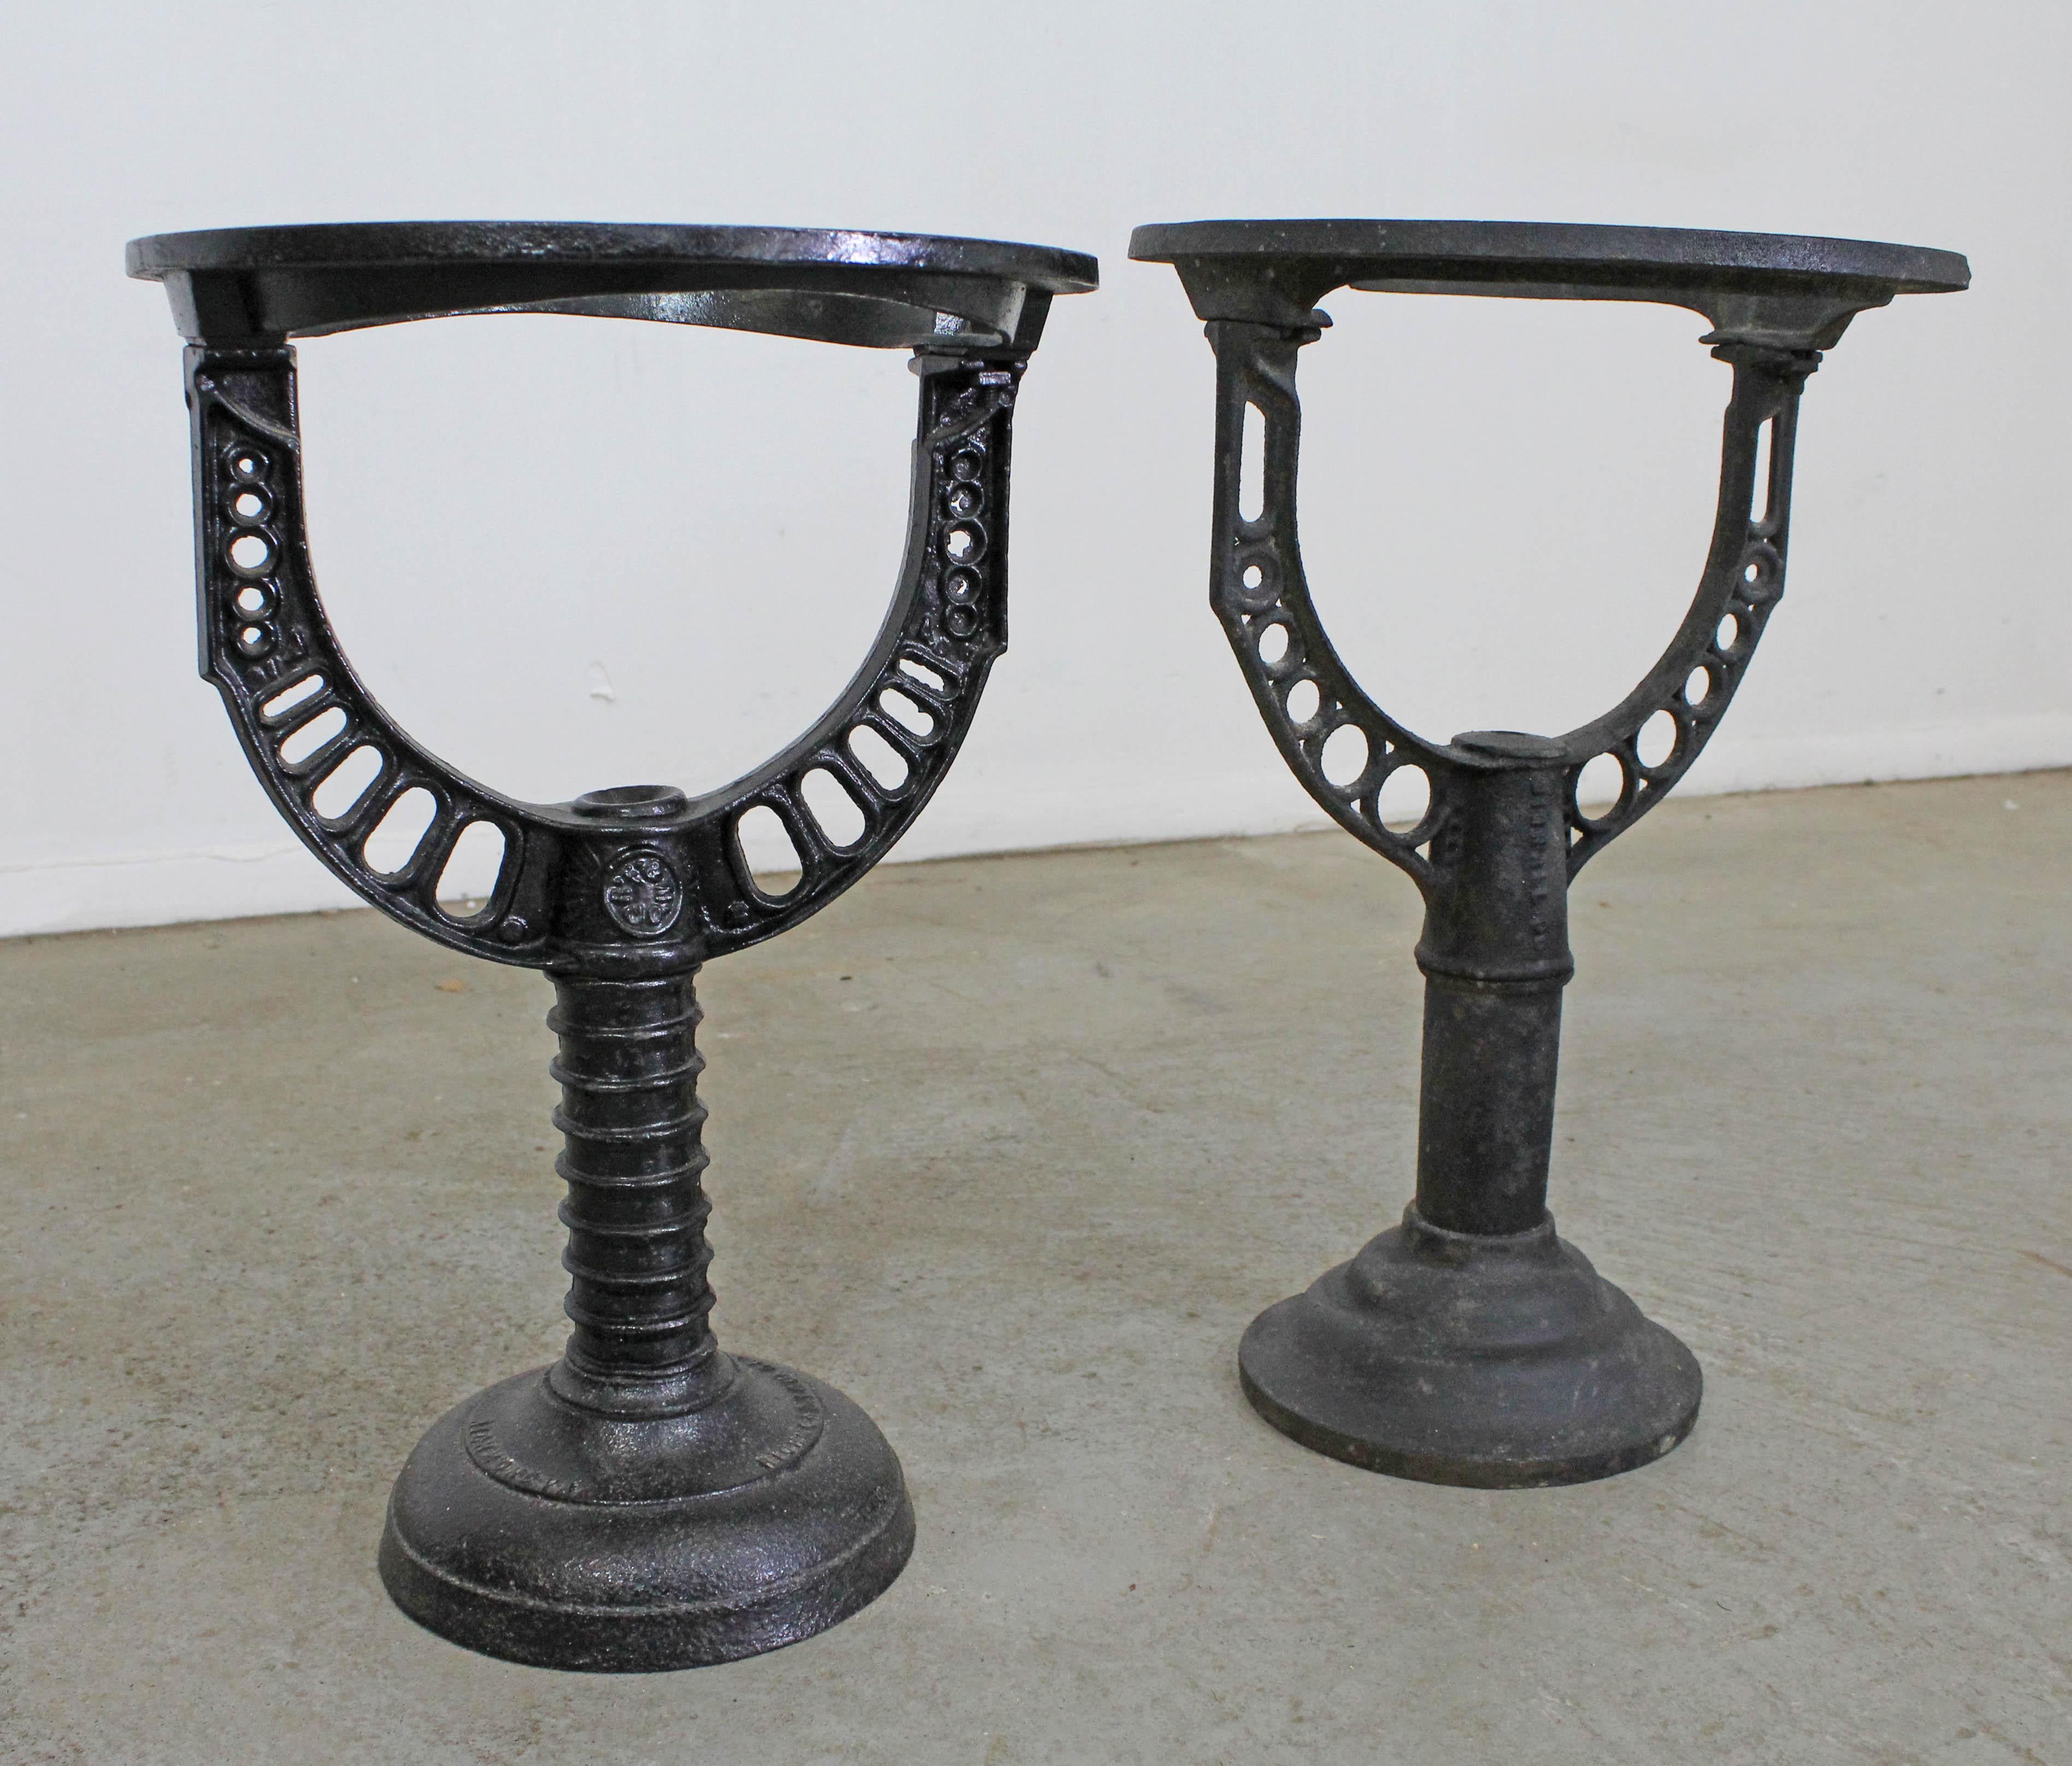 Offered is a pair of wrought iron tables made from salvaged architectural Industrial parts with added glass tops. These are super unique, custom made pieces converted into end tables. One table is half an inch taller. They are in good condition